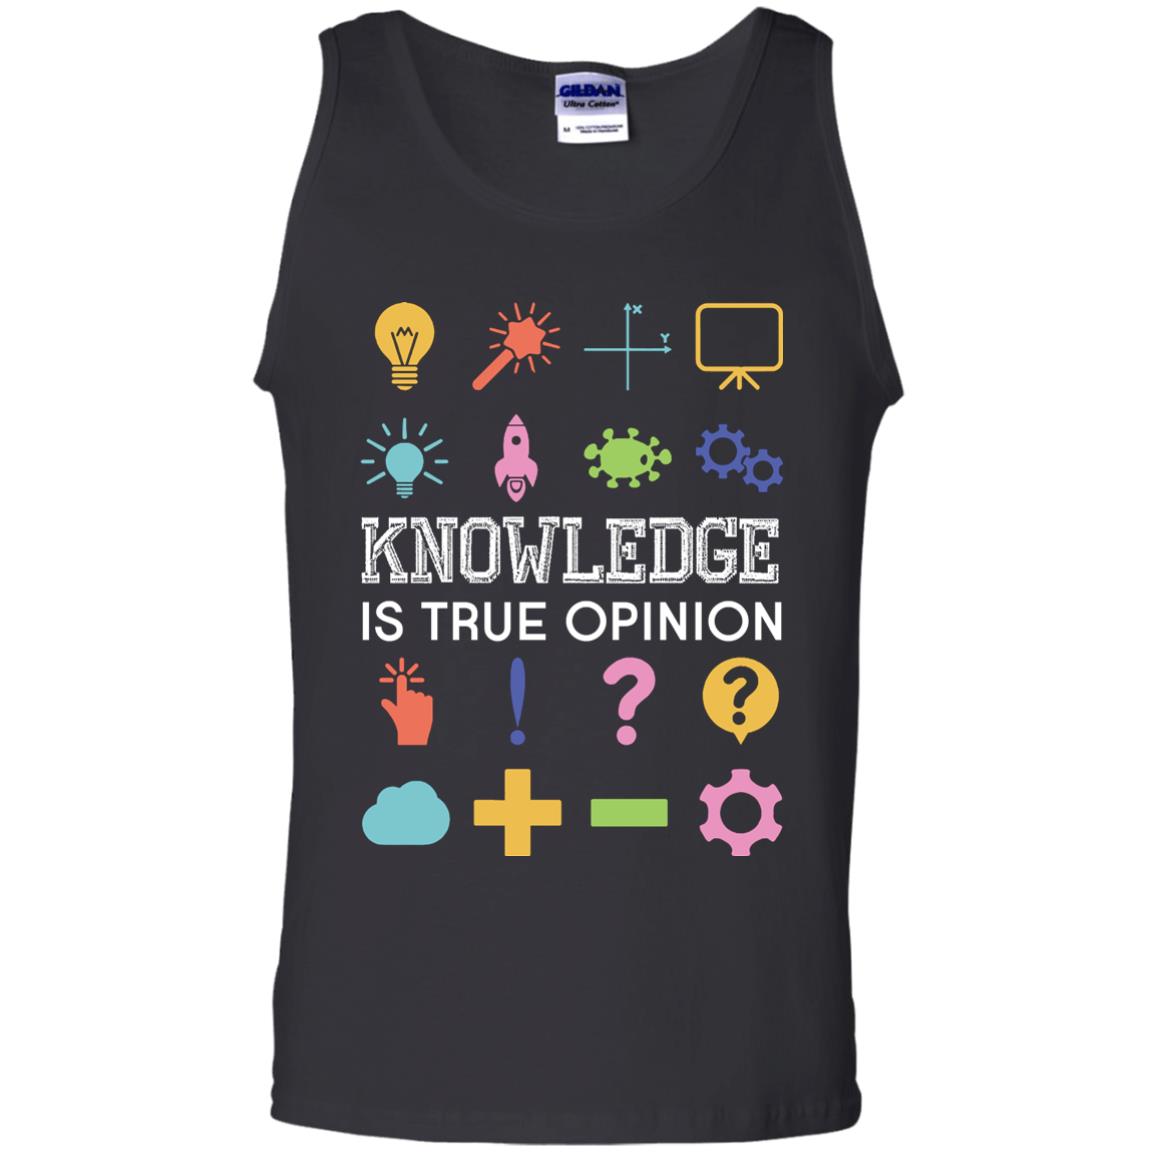 Knowledge Is True Opinion Funny T-shirt For Teachers